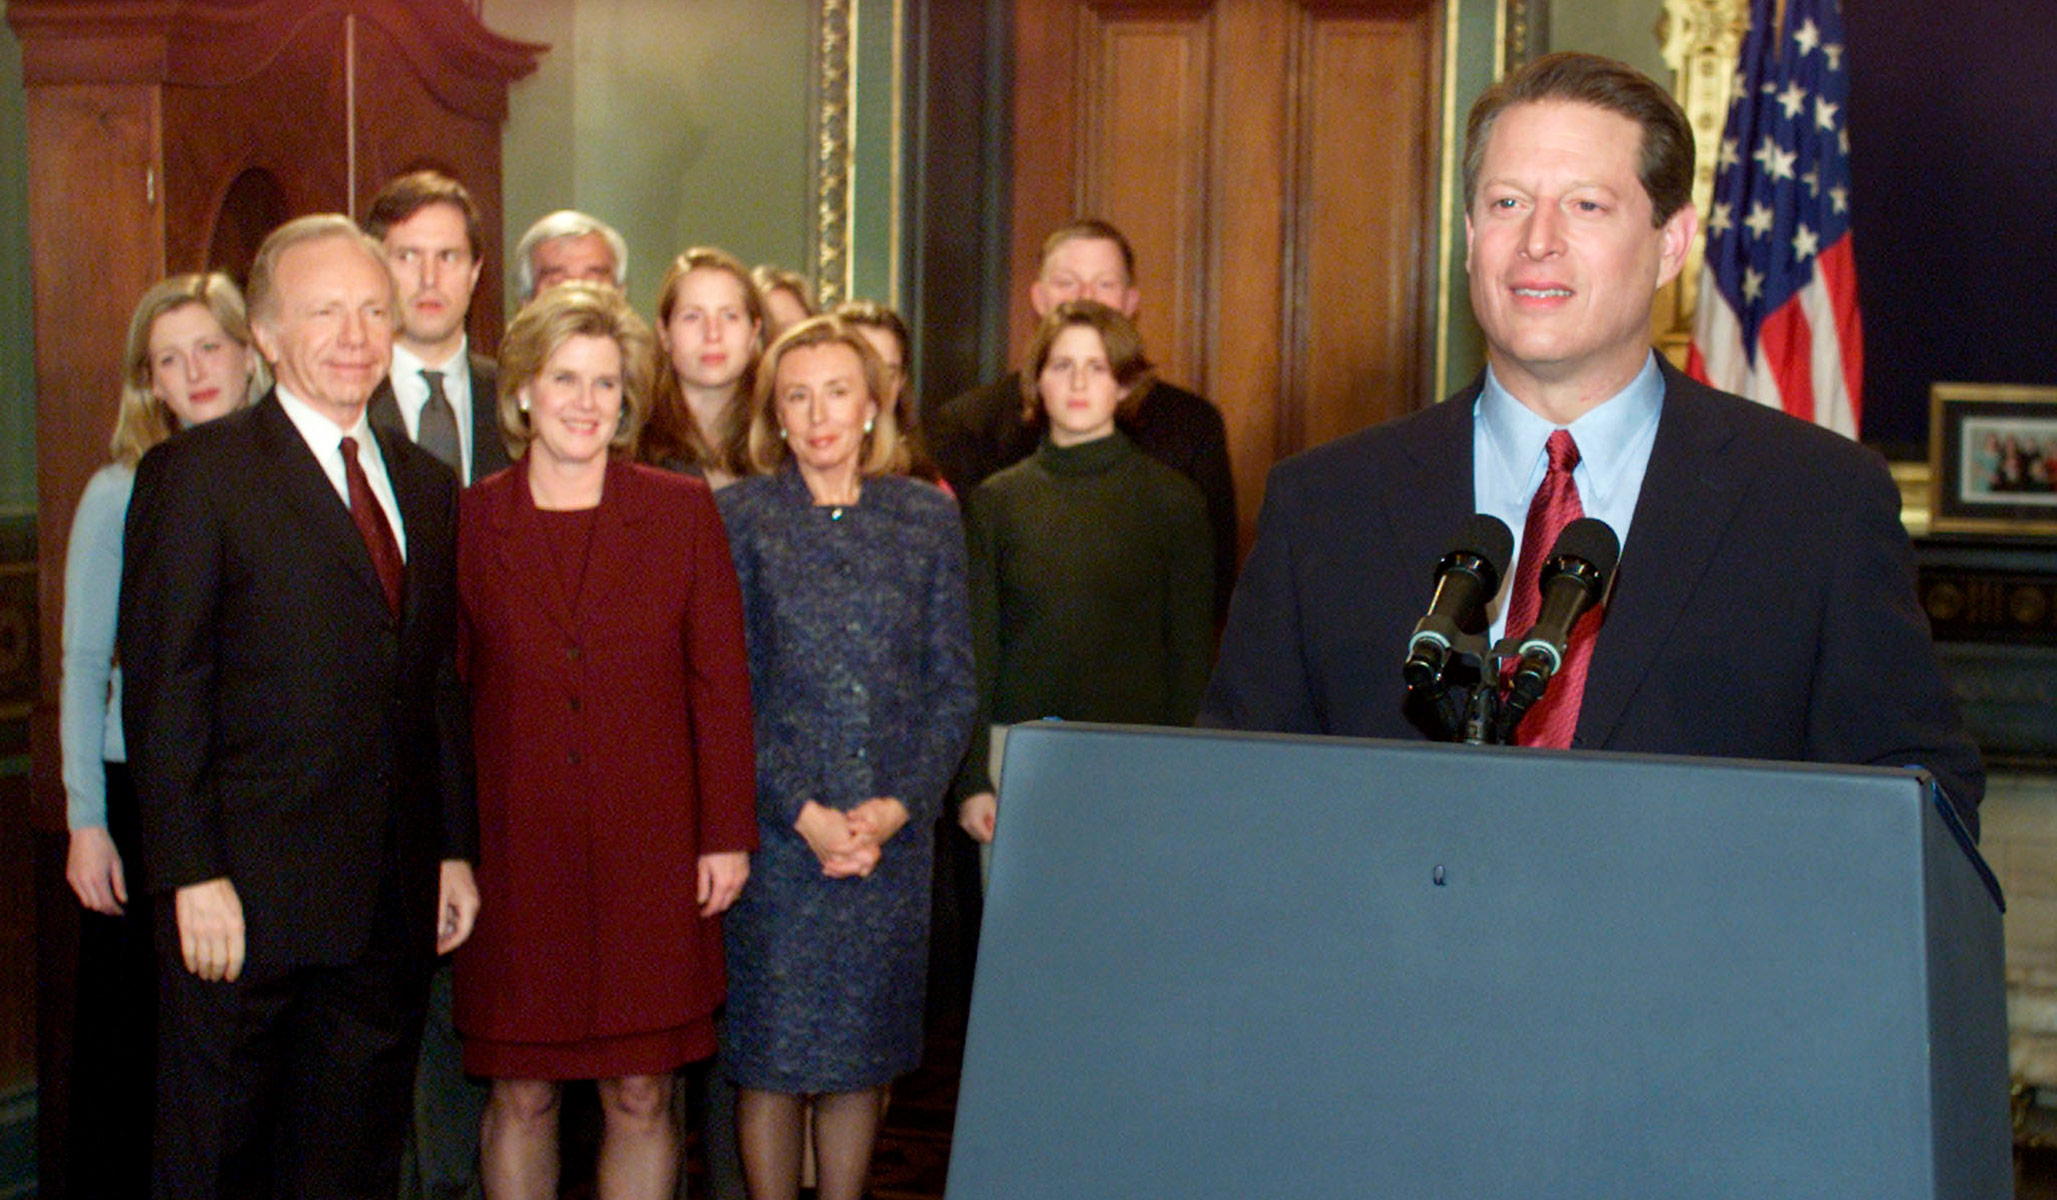 Al Gore Wasn't 'A Man' about Losing | National Review